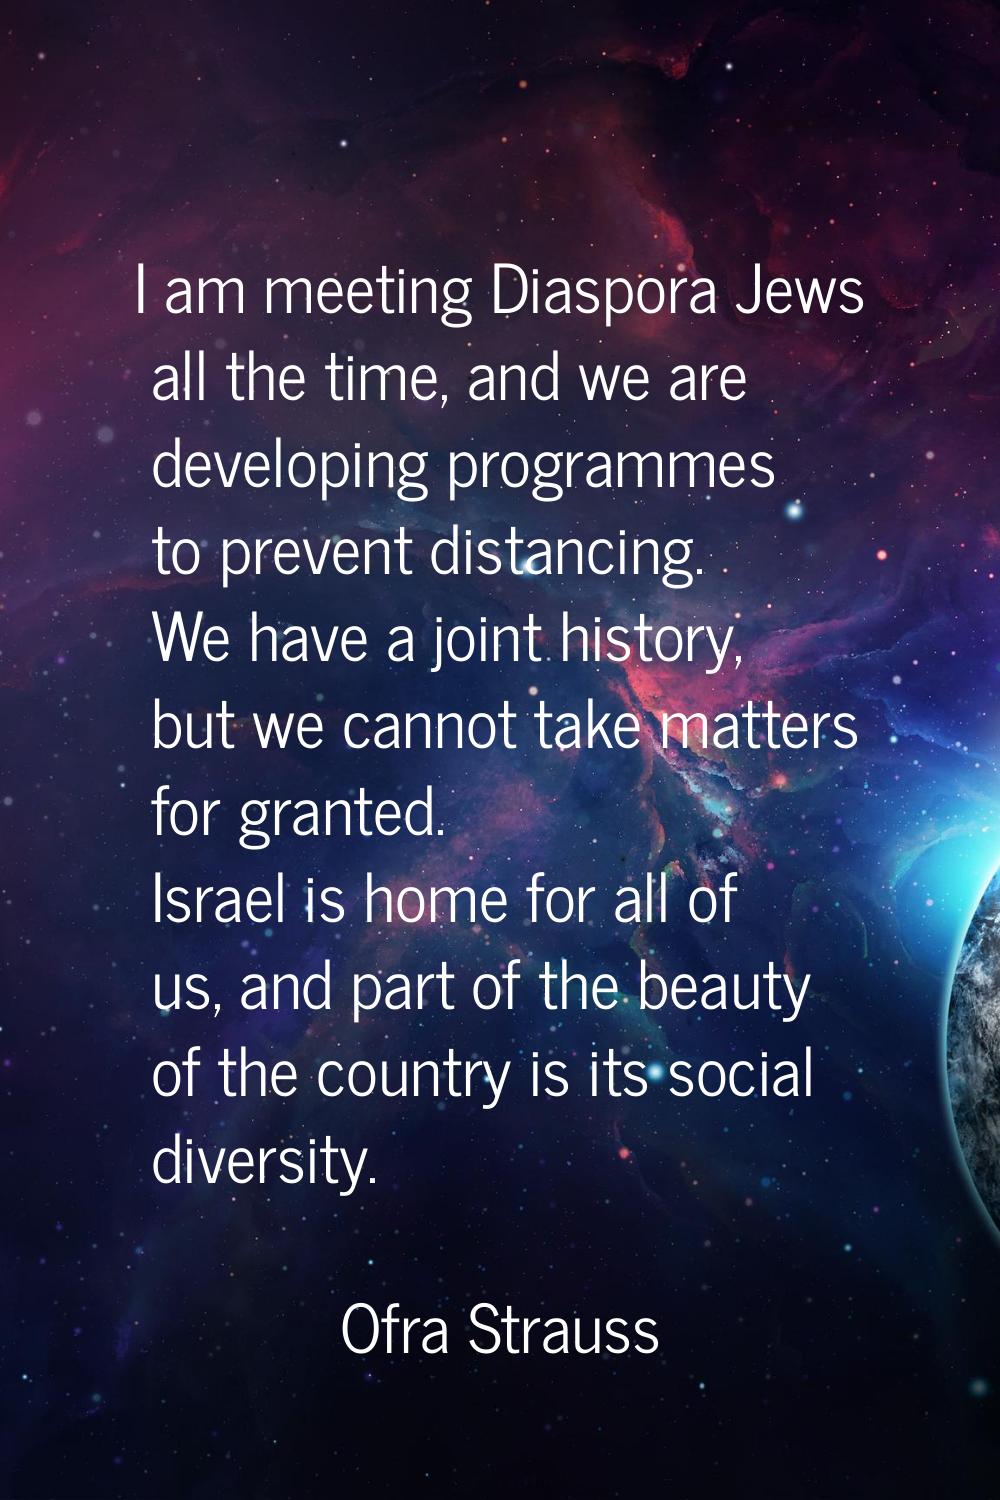 I am meeting Diaspora Jews all the time, and we are developing programmes to prevent distancing. We